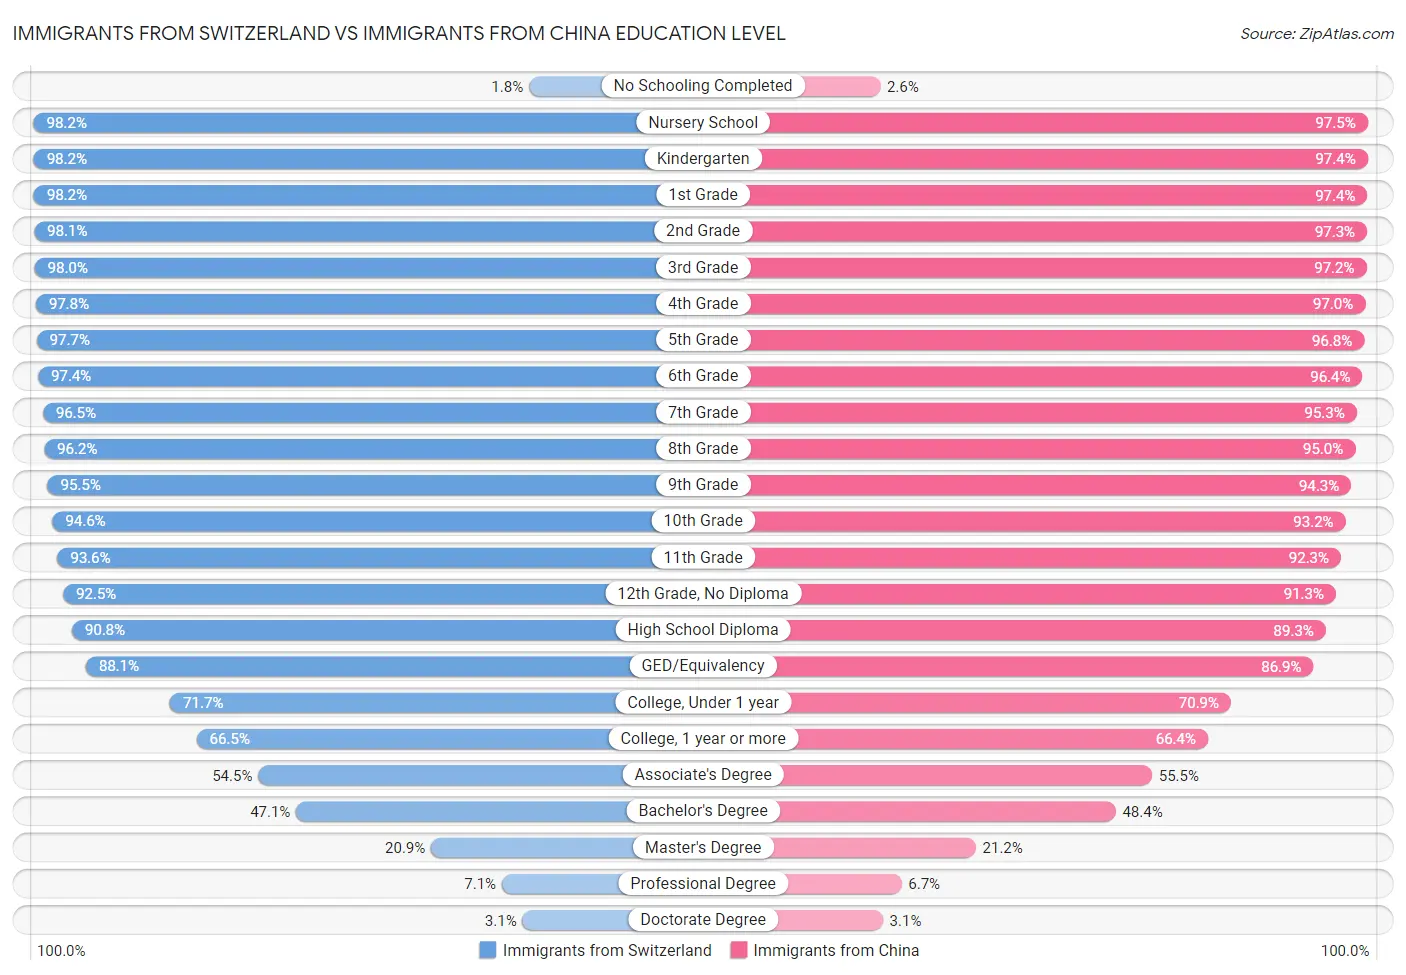 Immigrants from Switzerland vs Immigrants from China Education Level